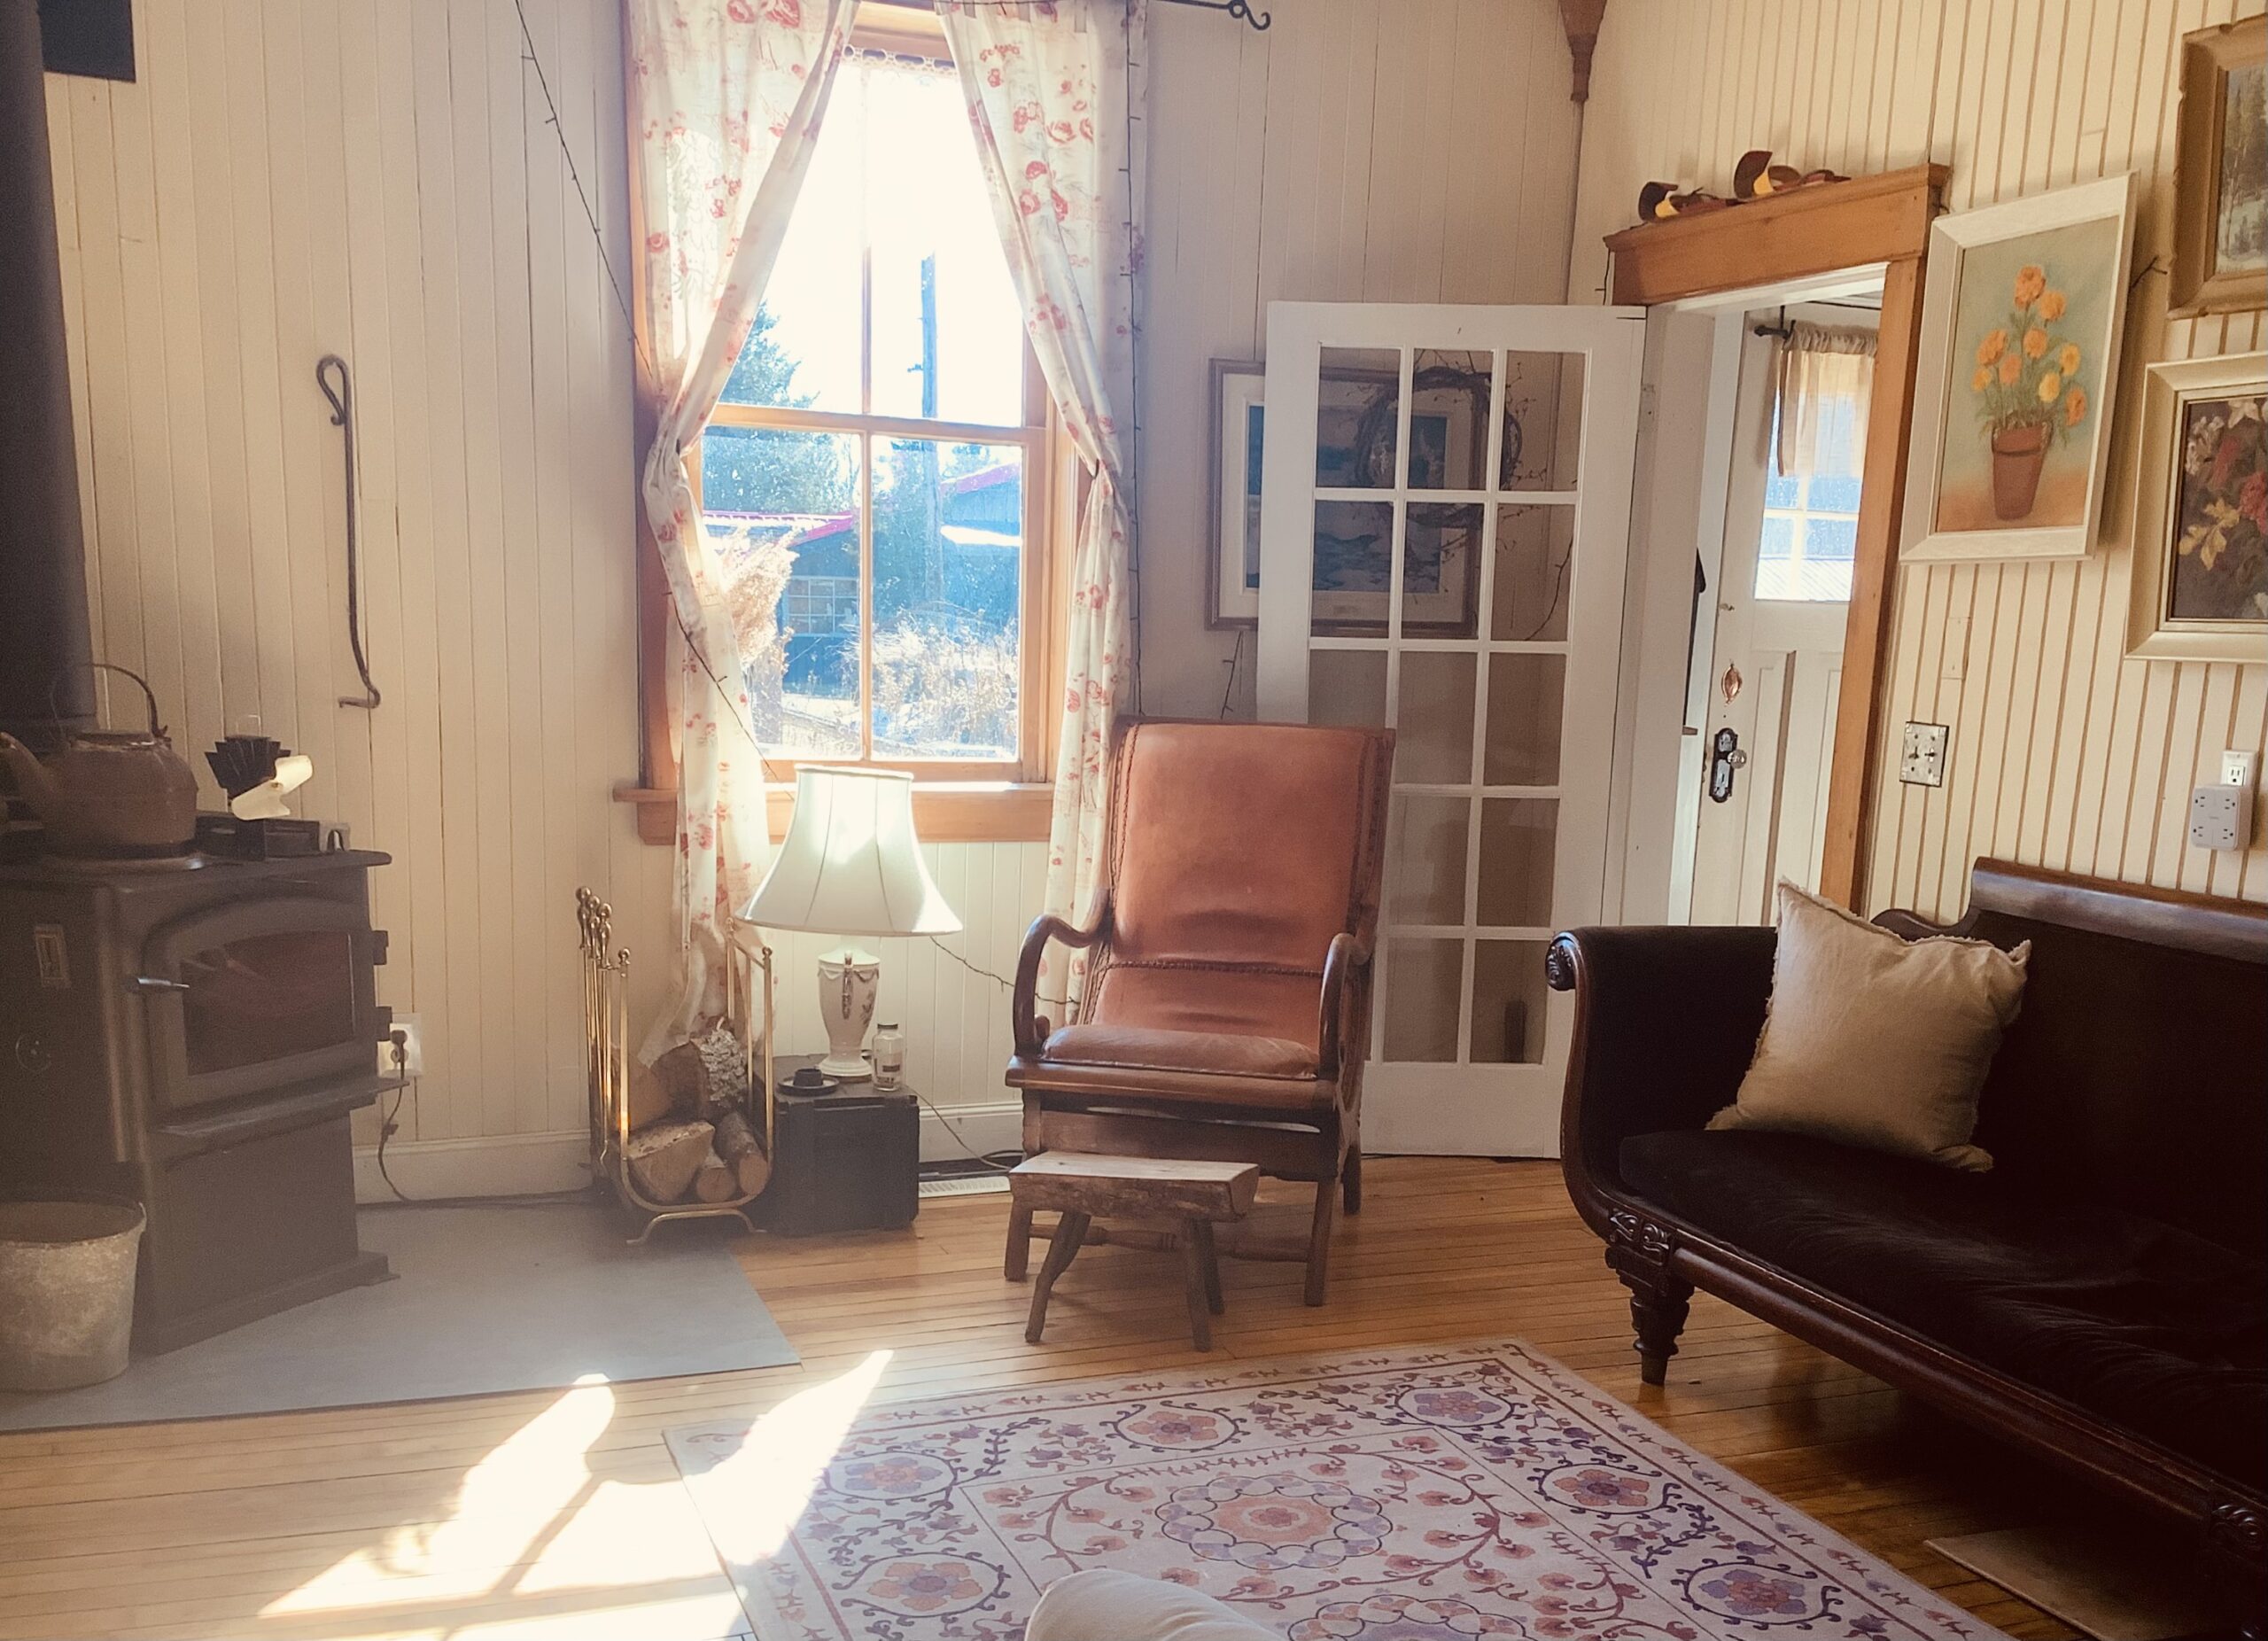 A small, bright living area with a woodstove in the corner, a window with drapes pulled to either side, a pink chair, a vintage couch, and an ornate floral rug over hardwood flooring. A gallery wall of framed art hangs above the couch.